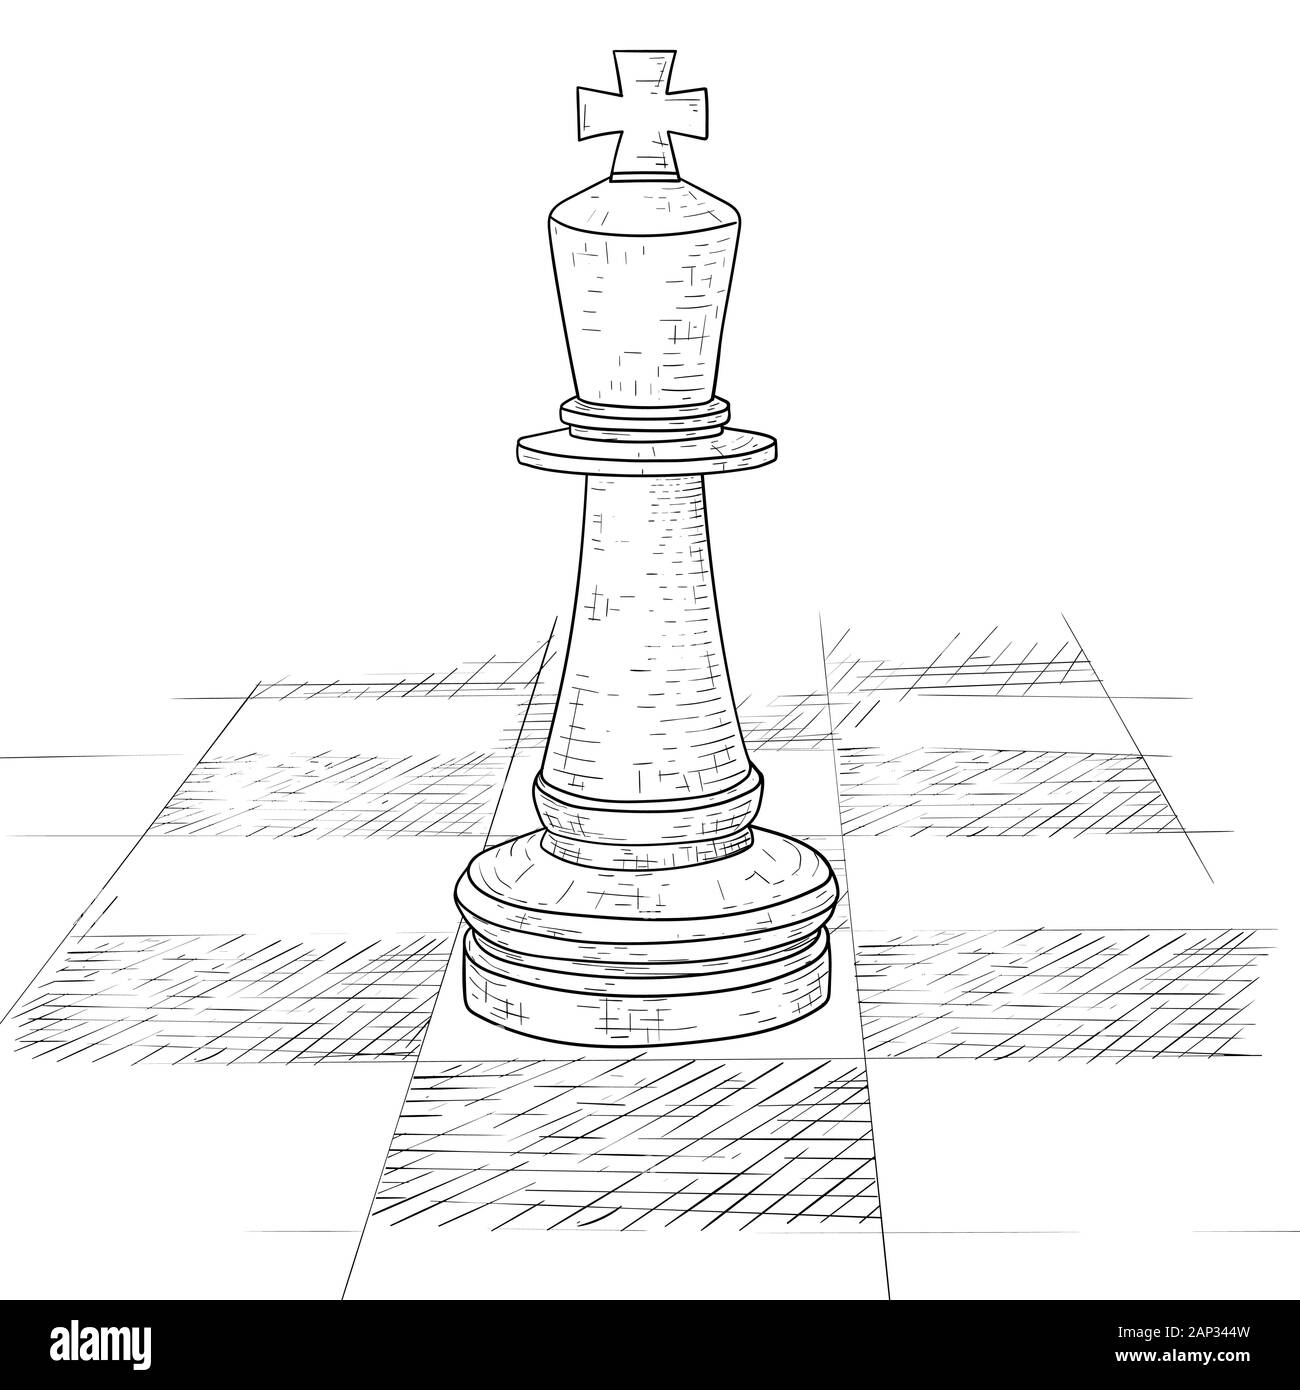 The king chess piece on a chess board. Hand drawn sketch Stock Vector